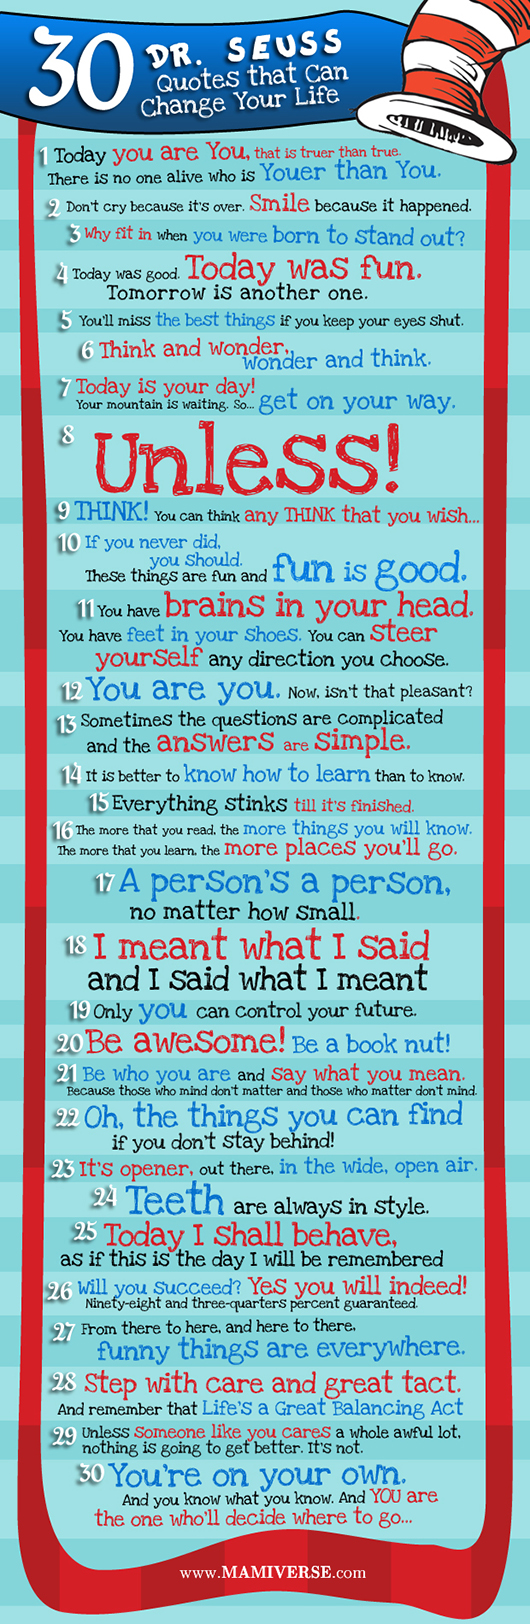 30-Dr.-Seuss-Quotes-that-Can-Change-Your-Life-Infographic1